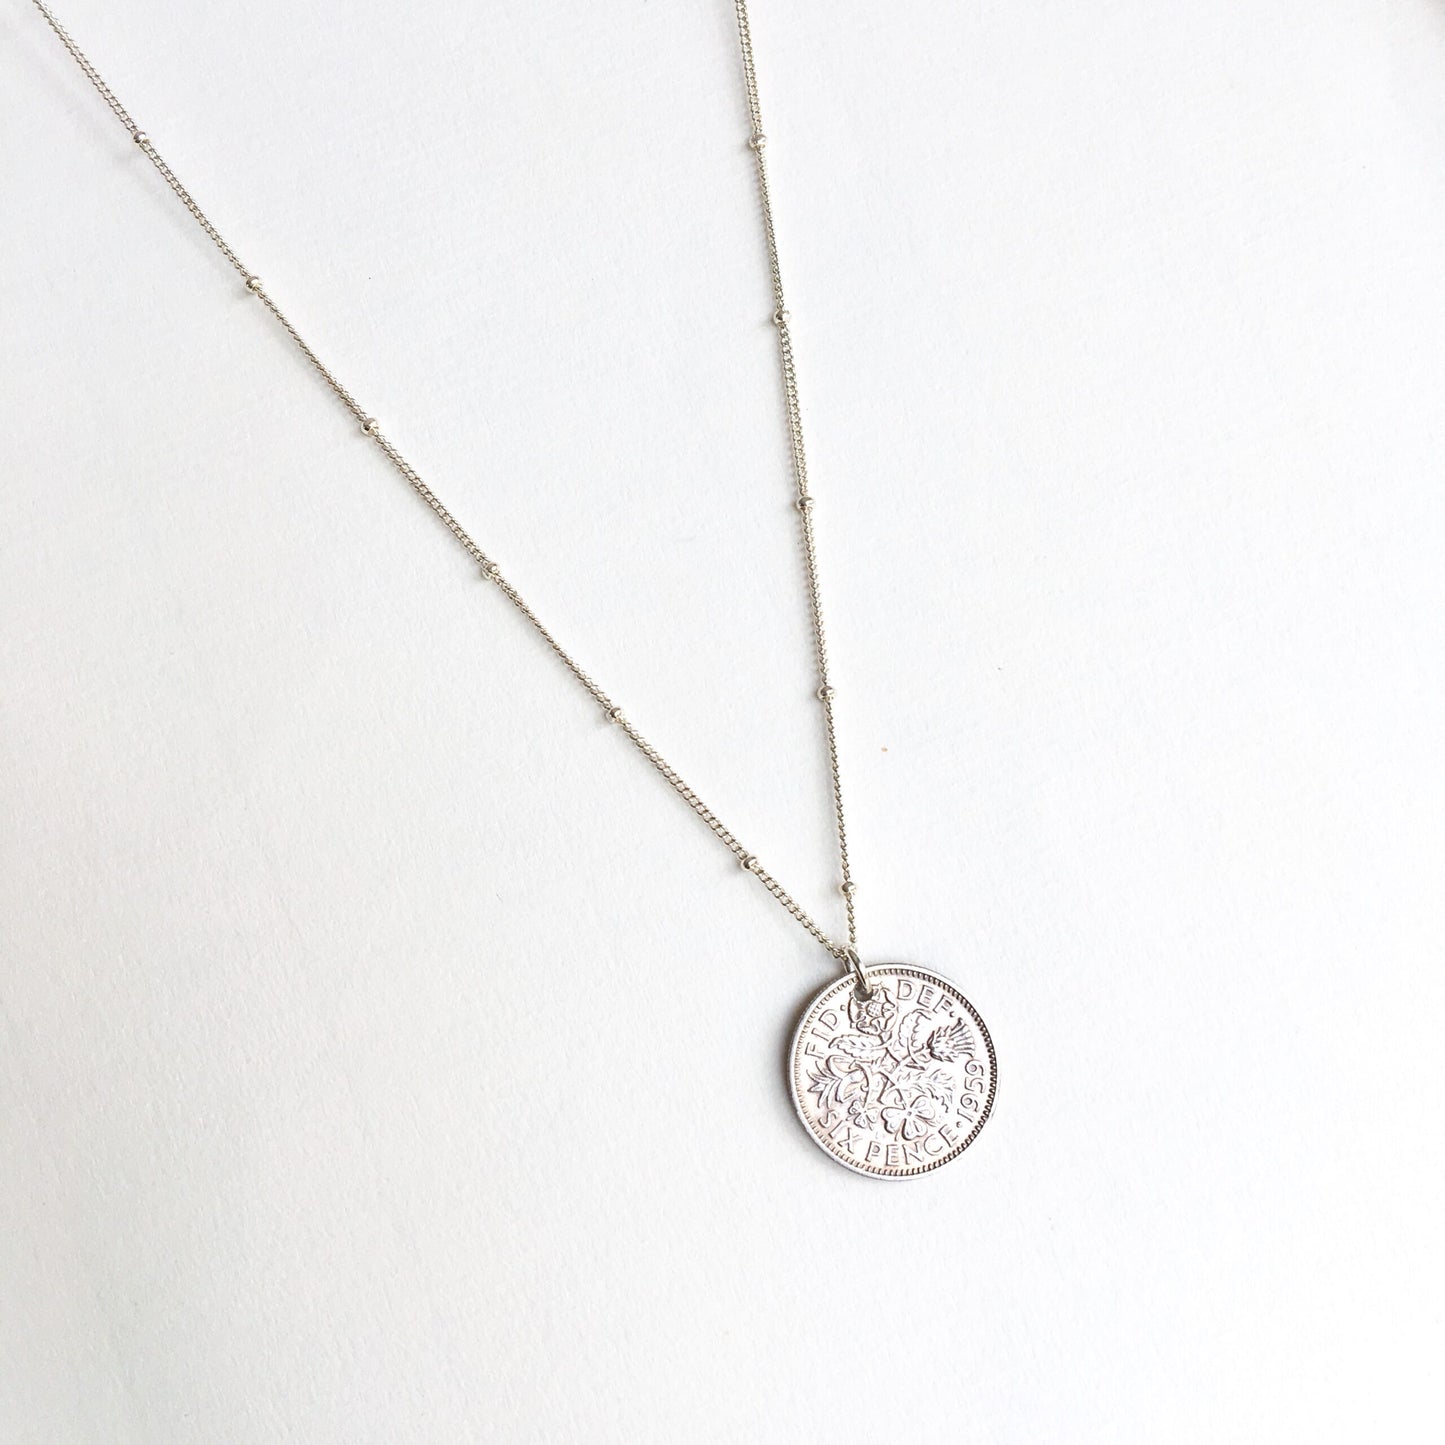 Satellite Sixpence Necklace - 1953-1967 - Steel